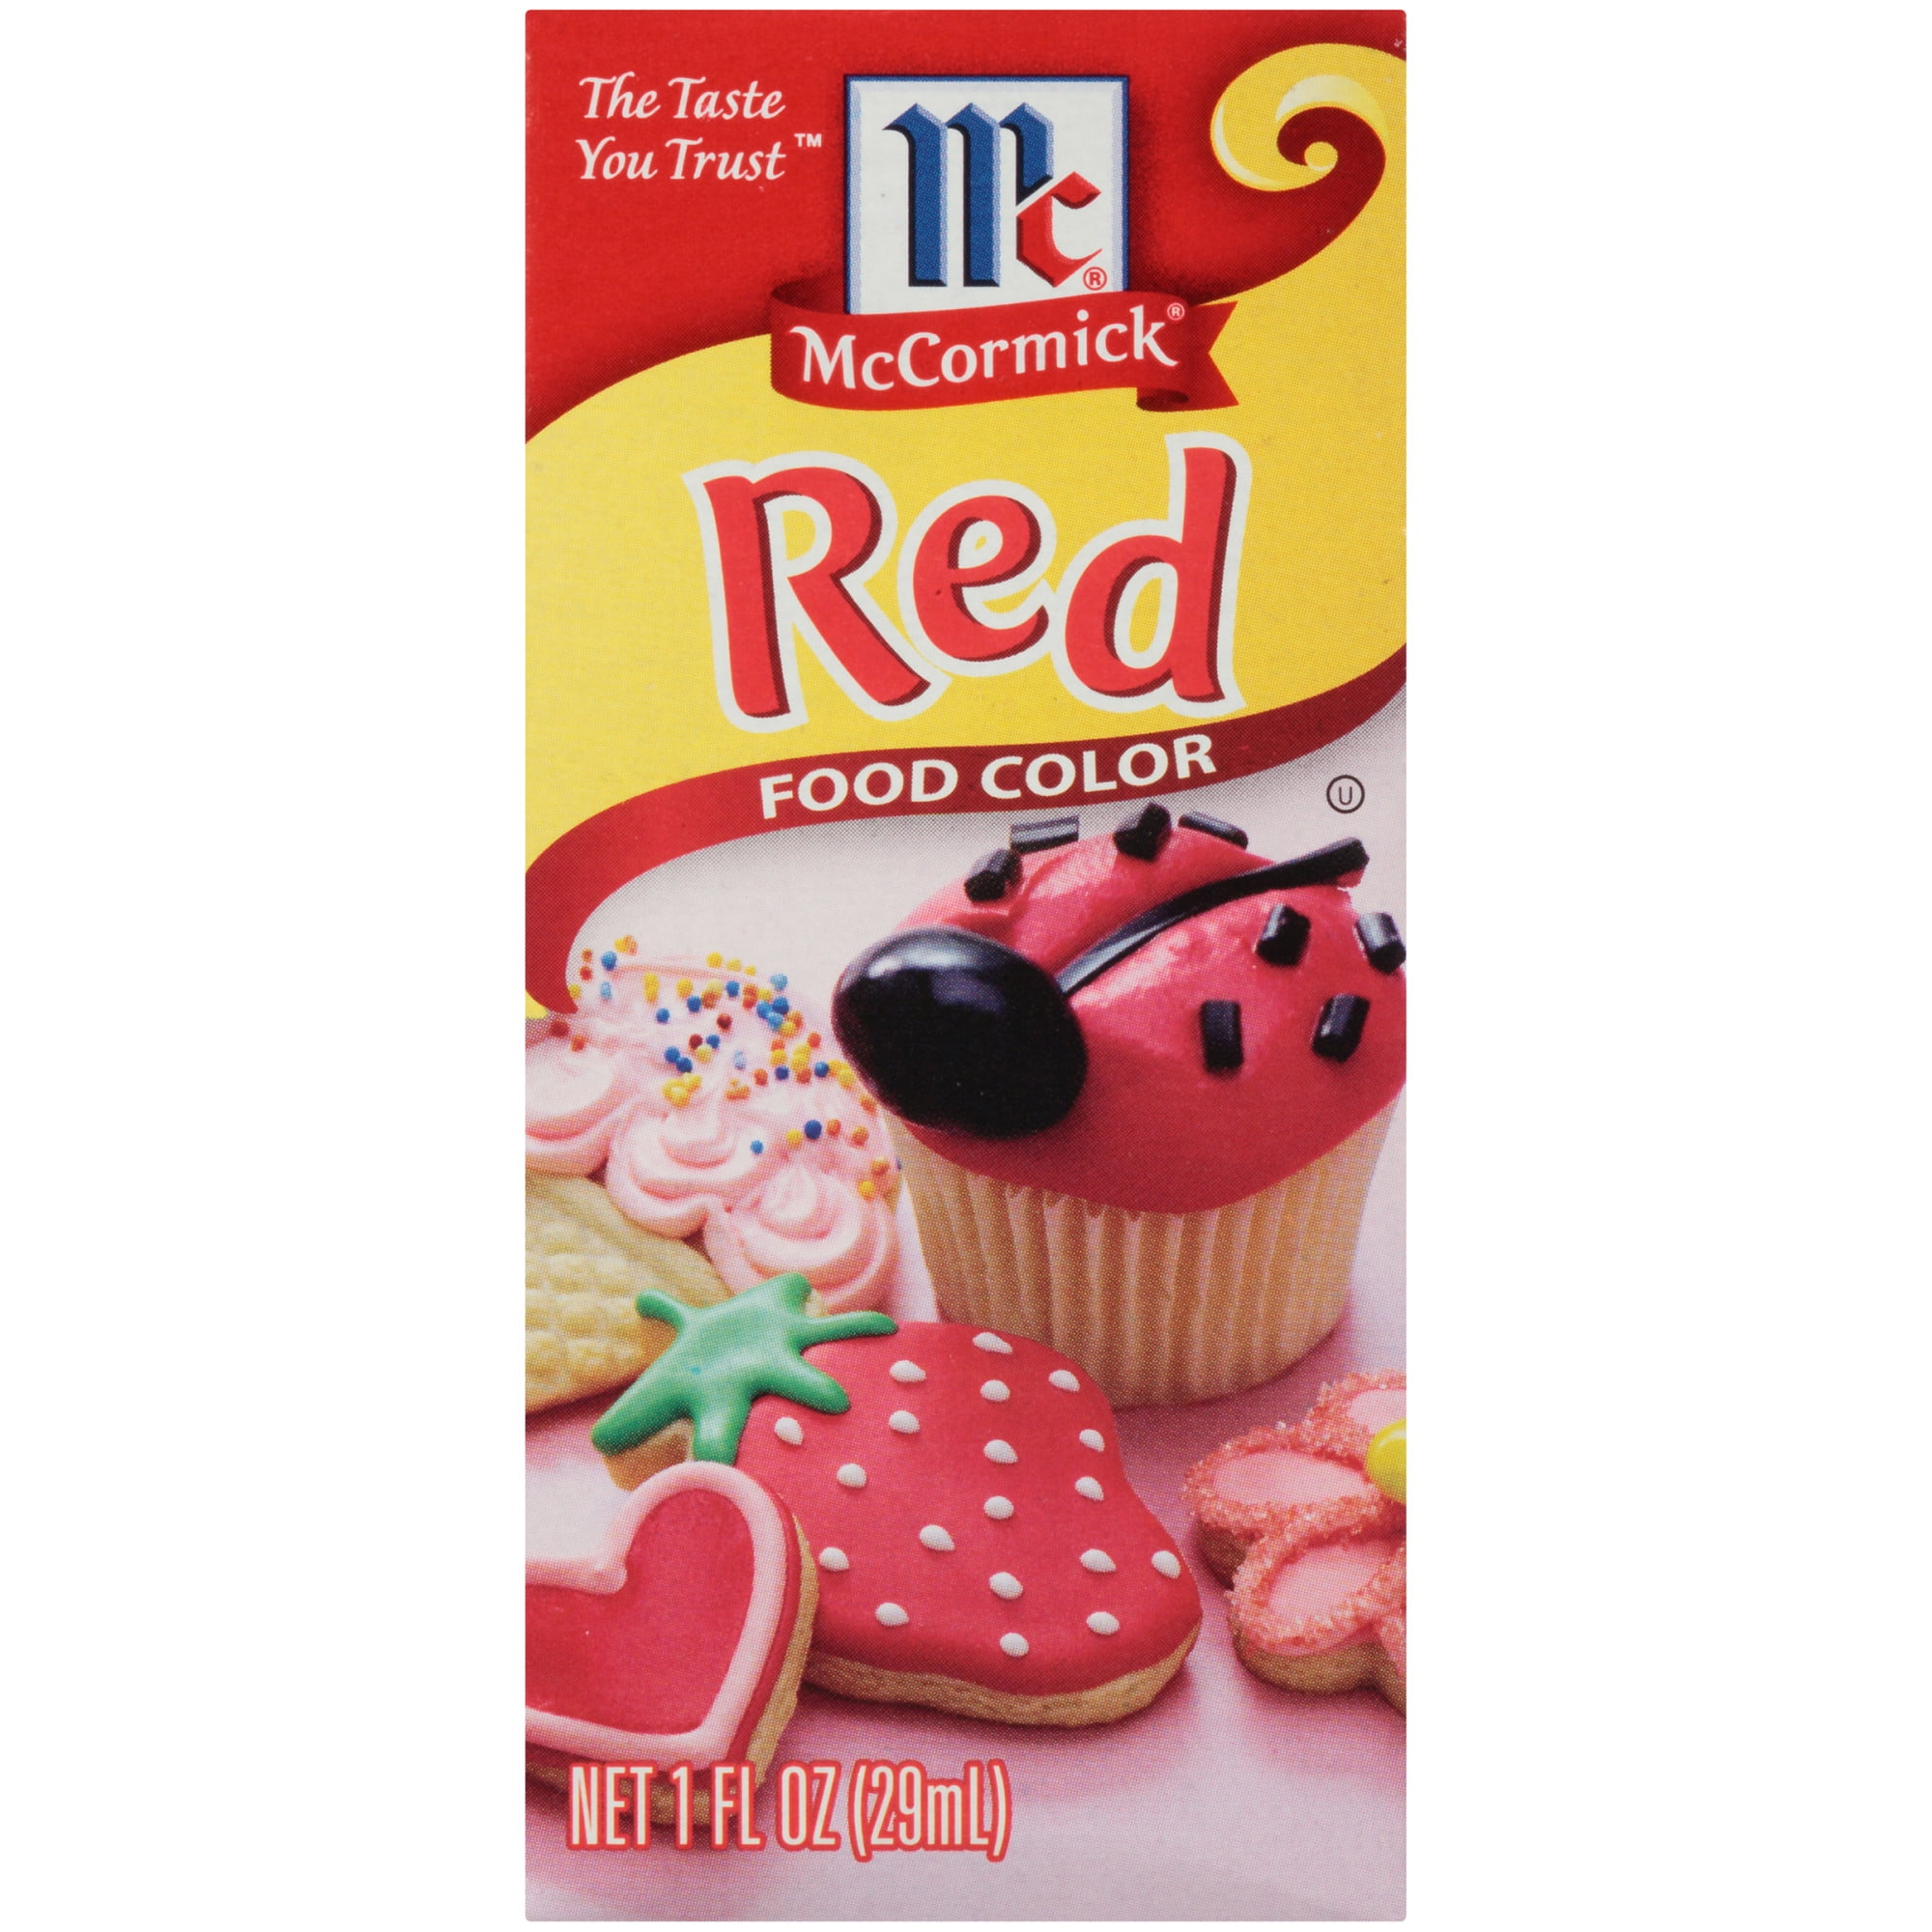 Food Coloring, 1.2 Fl Oz, Shipped to You